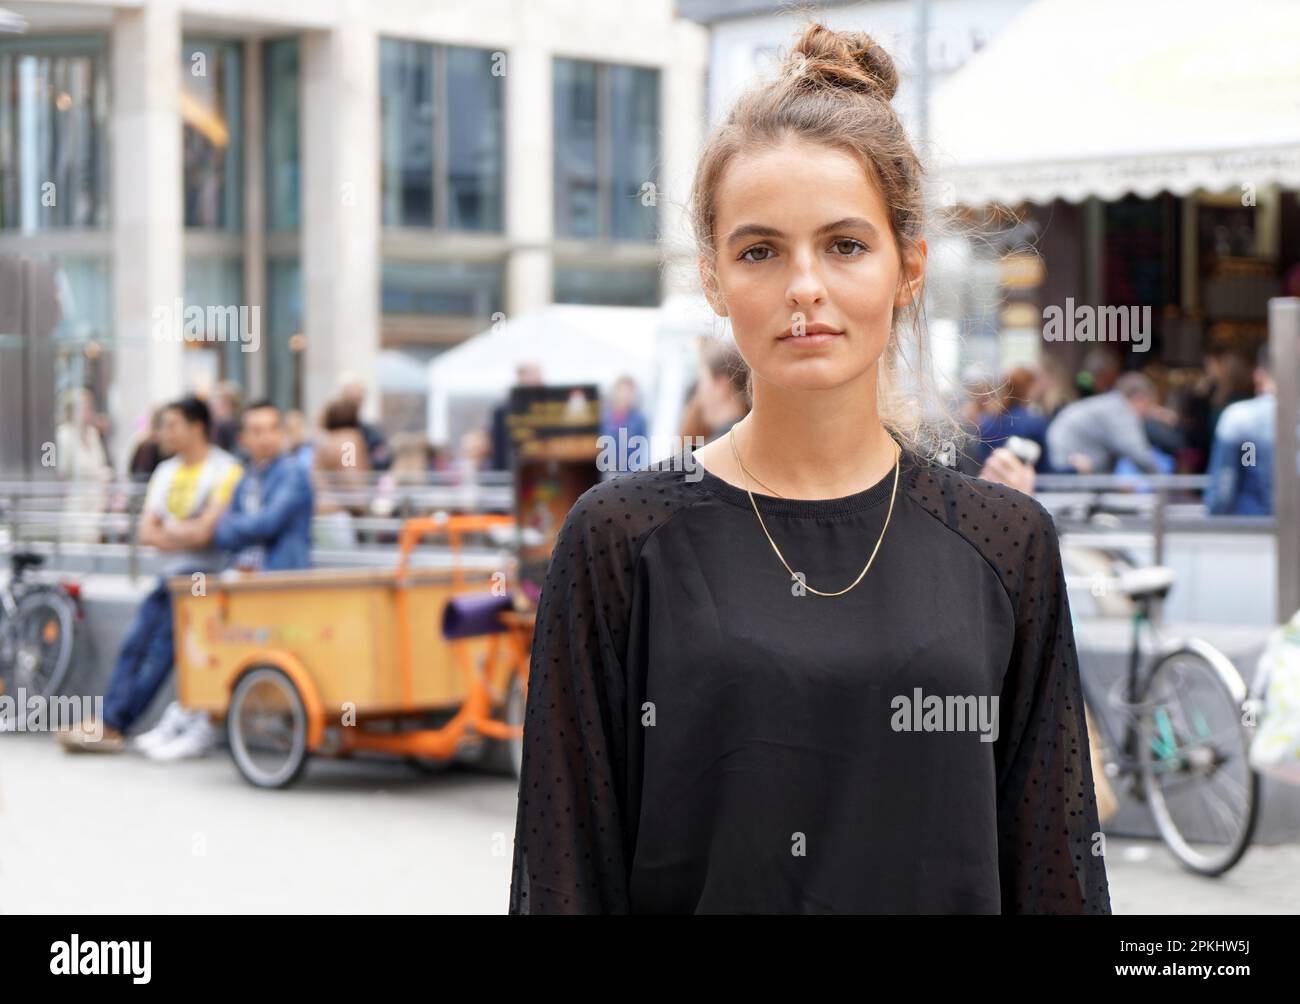 young woman downtown in a pedestrian area with blurred people and shops in the background Stock Photo